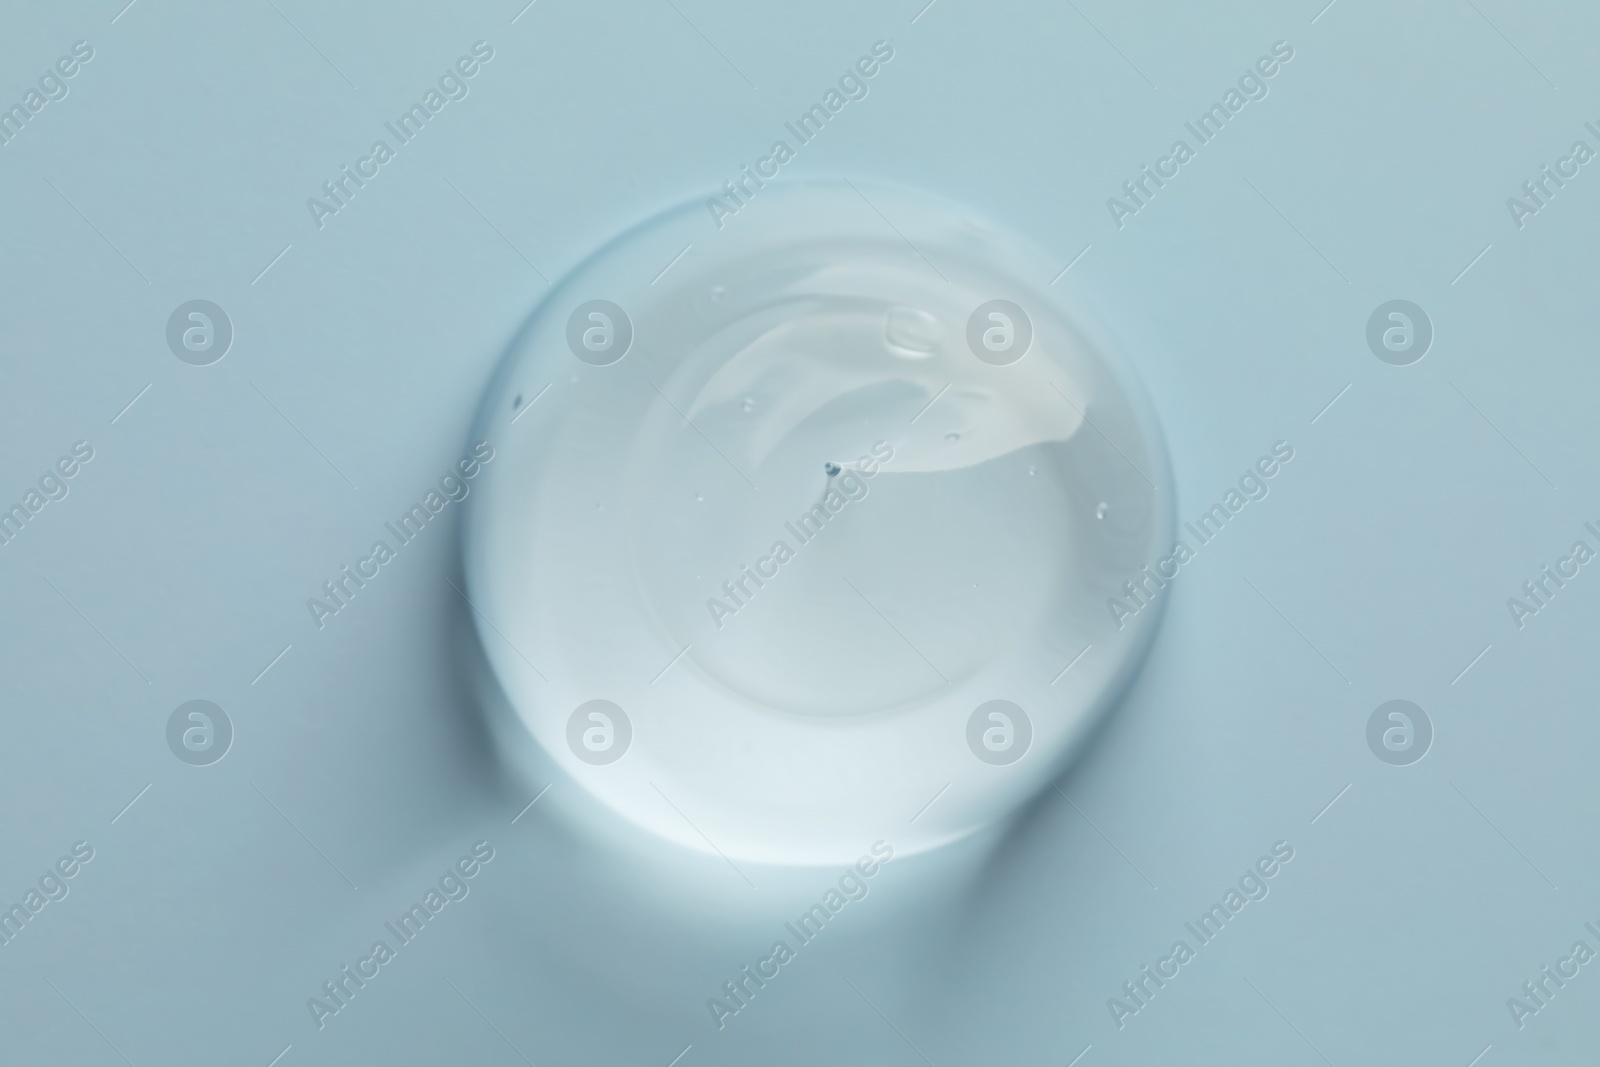 Photo of Sample of clear cosmetic gel on light blue background, top view